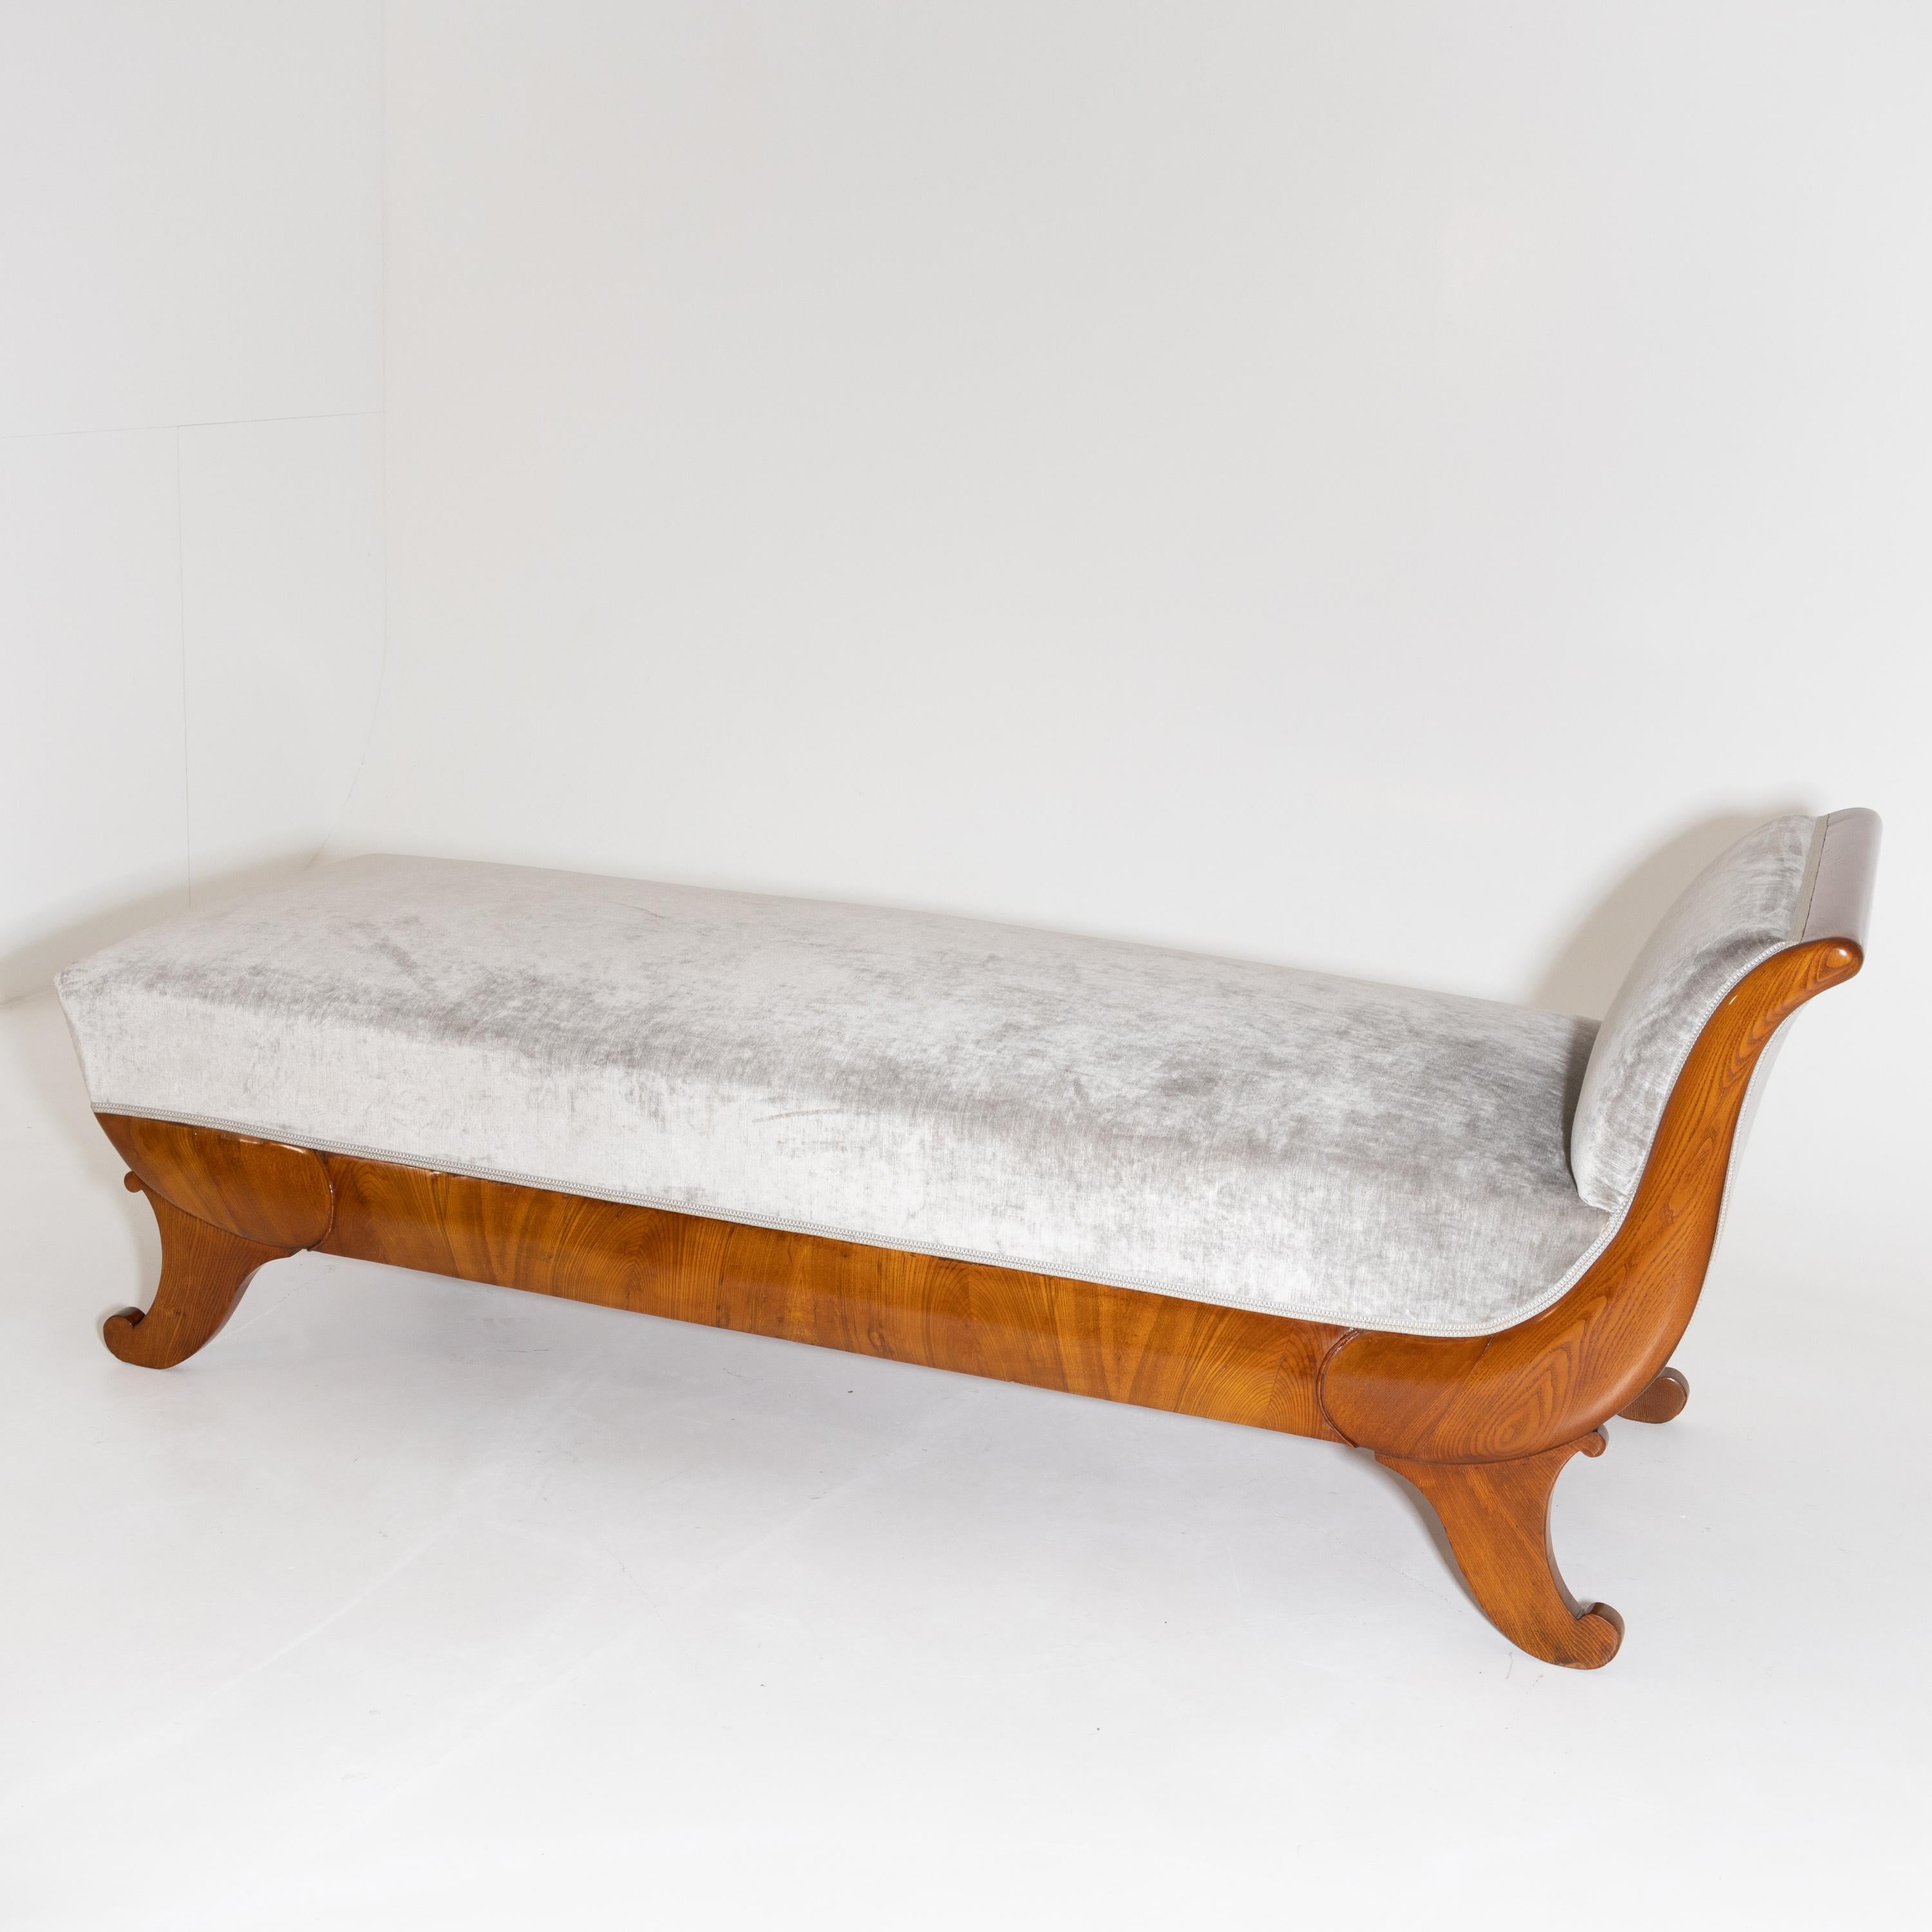 Biedermeier recamiere in ash, with sledge-shaped backrest standing on stylized volute feet. The straight frame is slightly rounded and hand polished. The recamiere has been newly upholstered on all sides with a smoky blue velvet fabric.